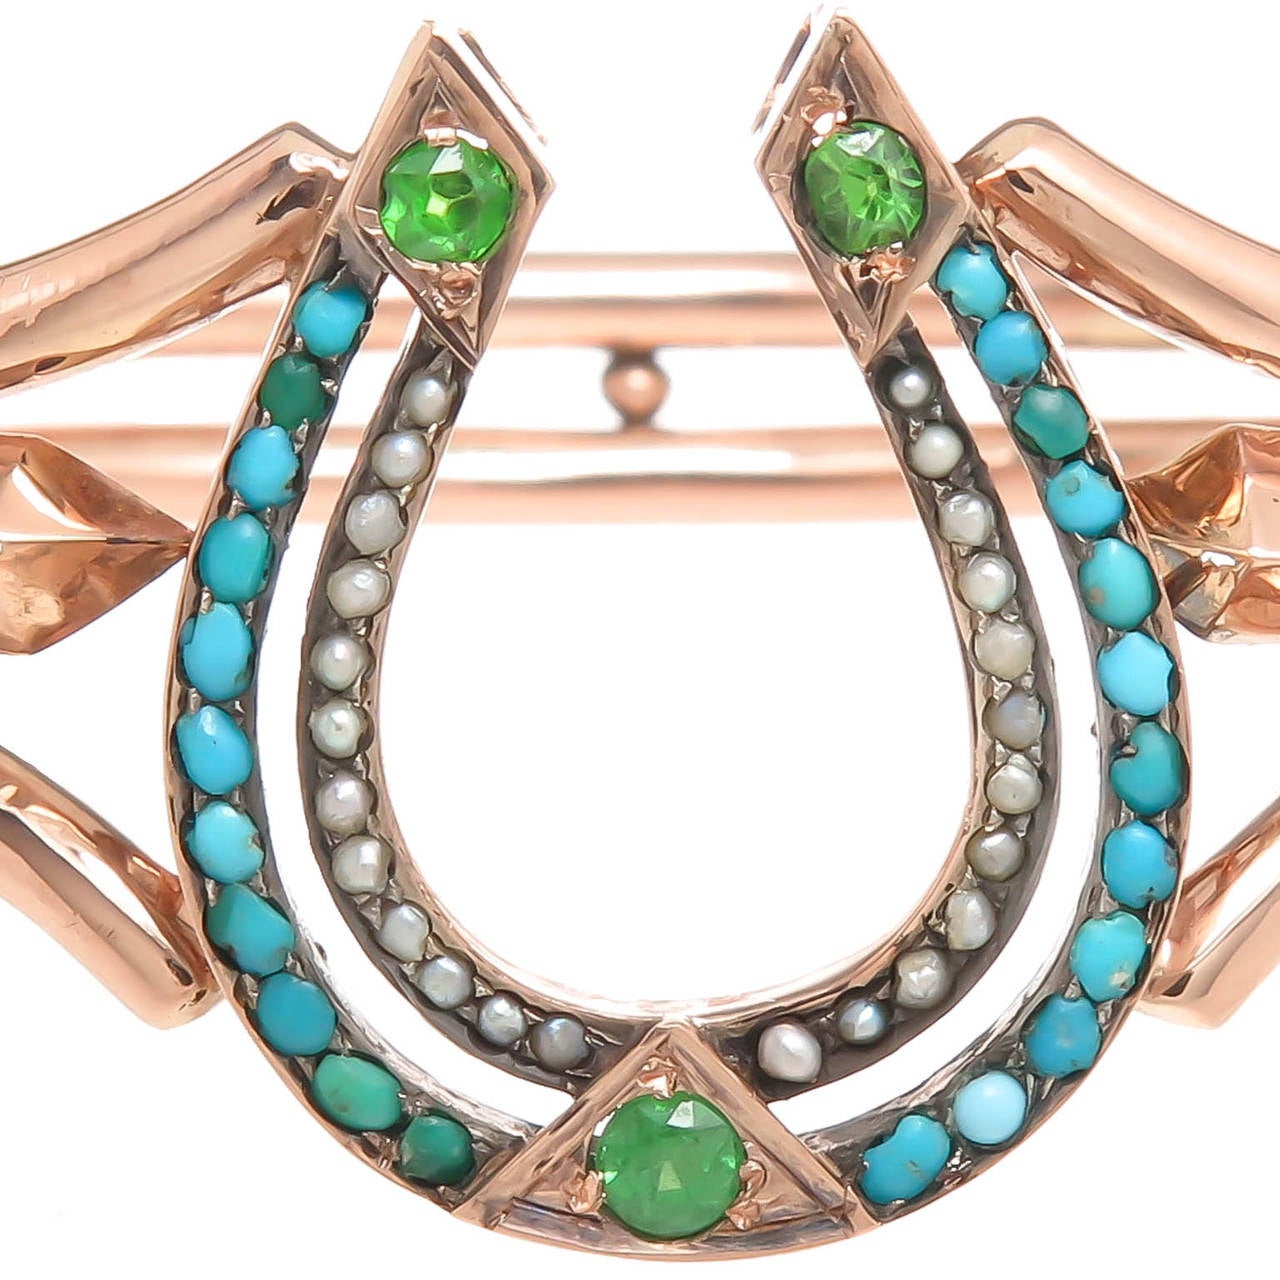 Circa 1910 14K rose gold Russian horse shoe bracelet, set with demantoid garnets, pearls and turquoise. Inside measurement = 7 inches.